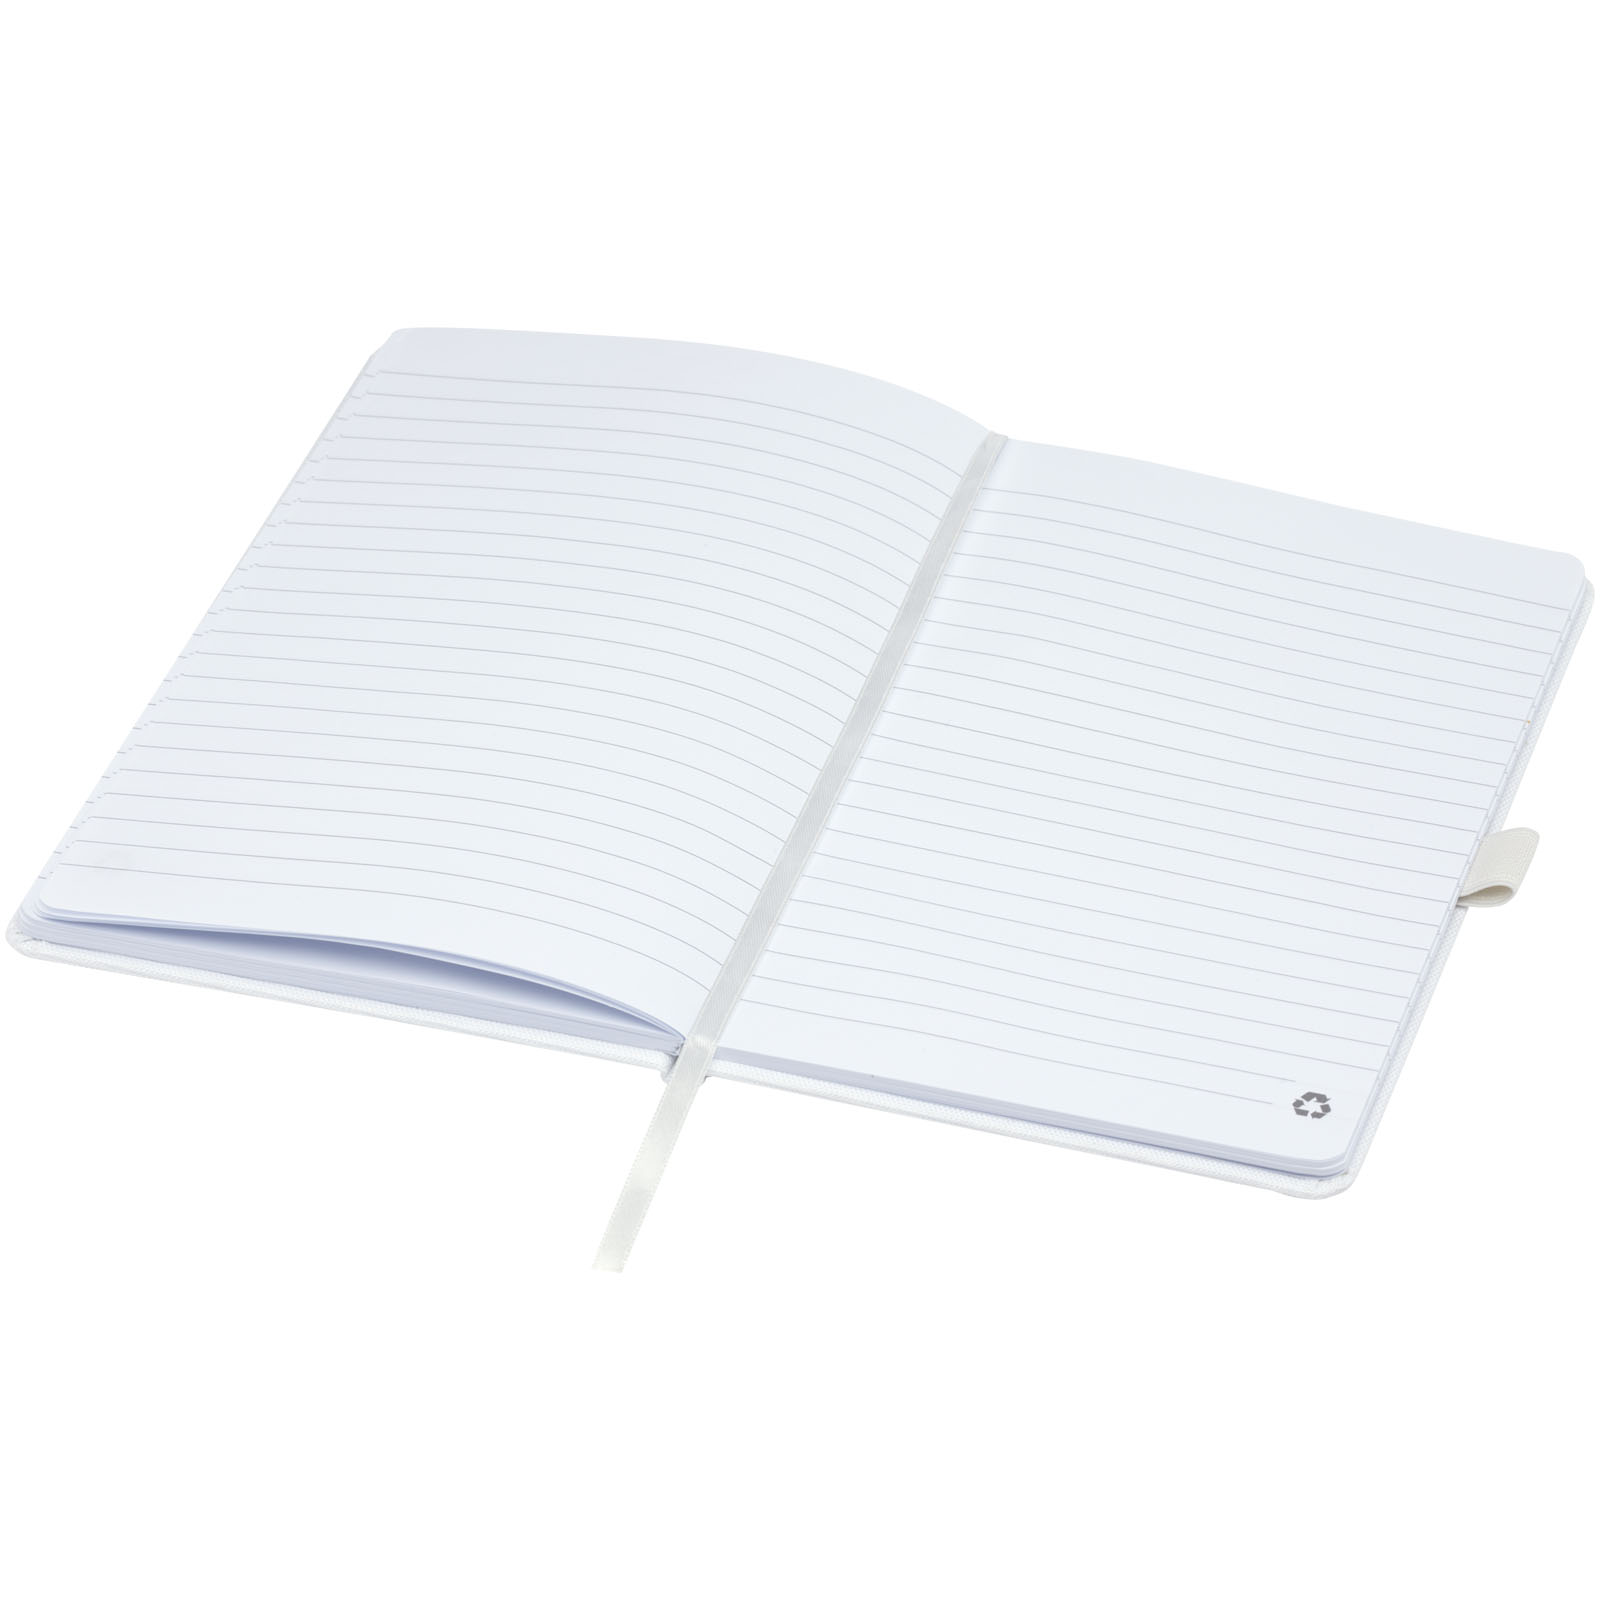 Advertising Hard cover notebooks - Honua A5 recycled paper notebook with recycled PET cover - 3